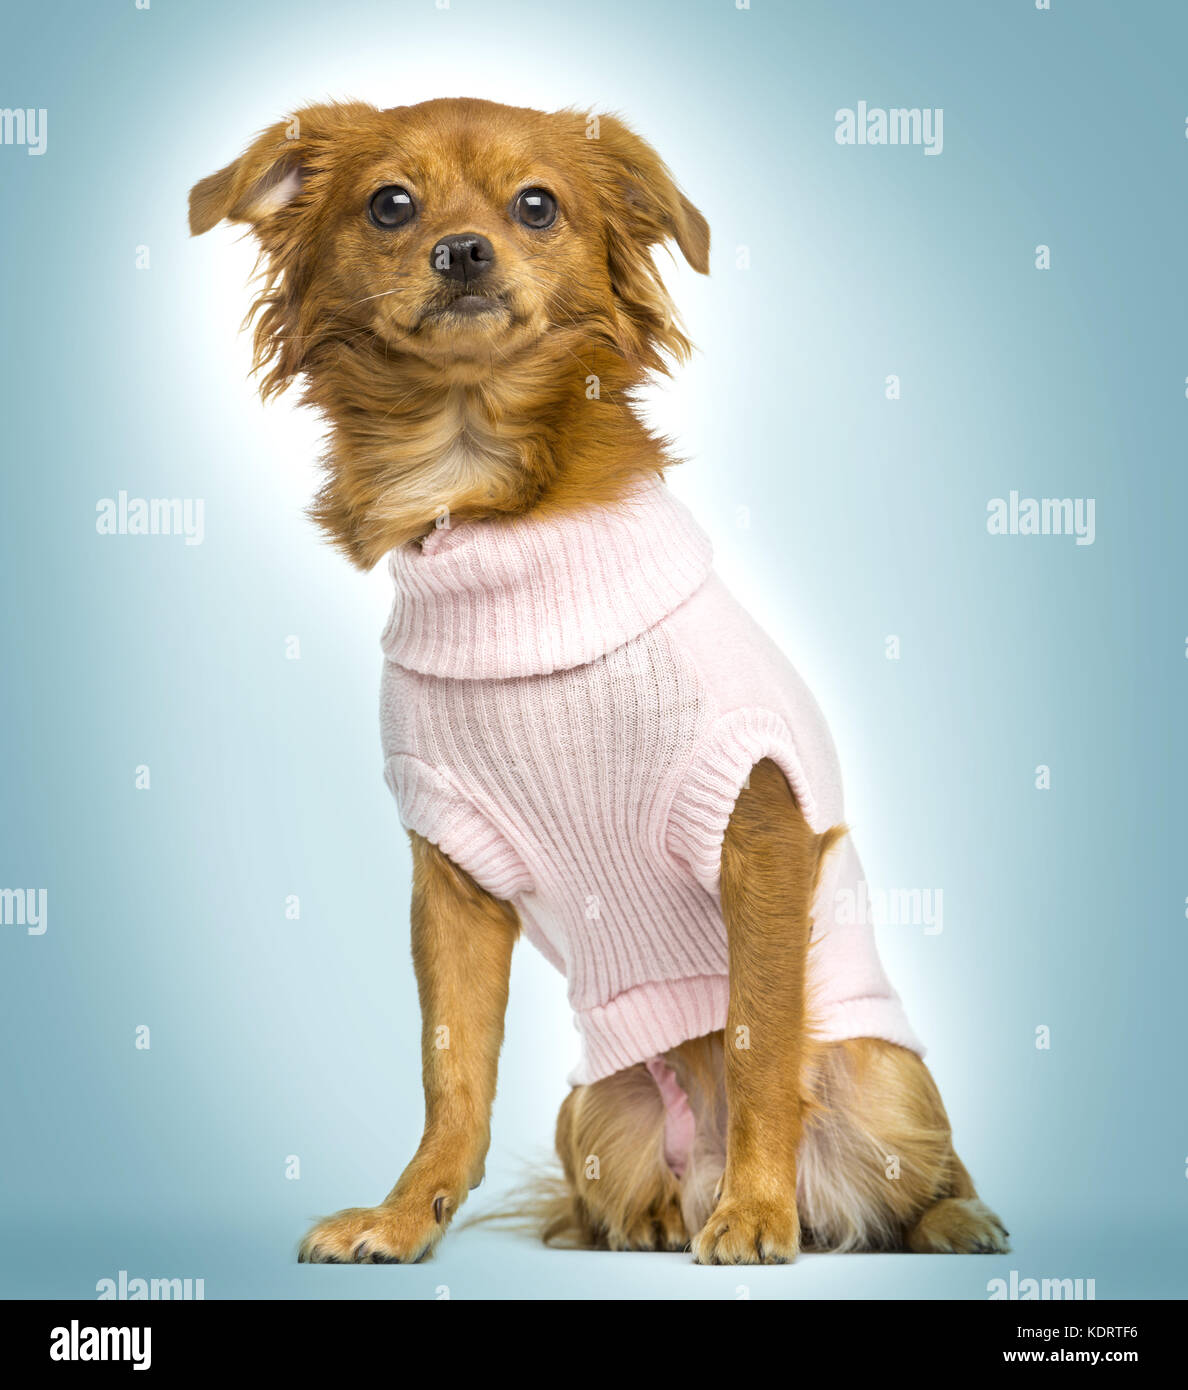 Dressed-up crossbreed dog sitting, on a blue gradient background Stock Photo